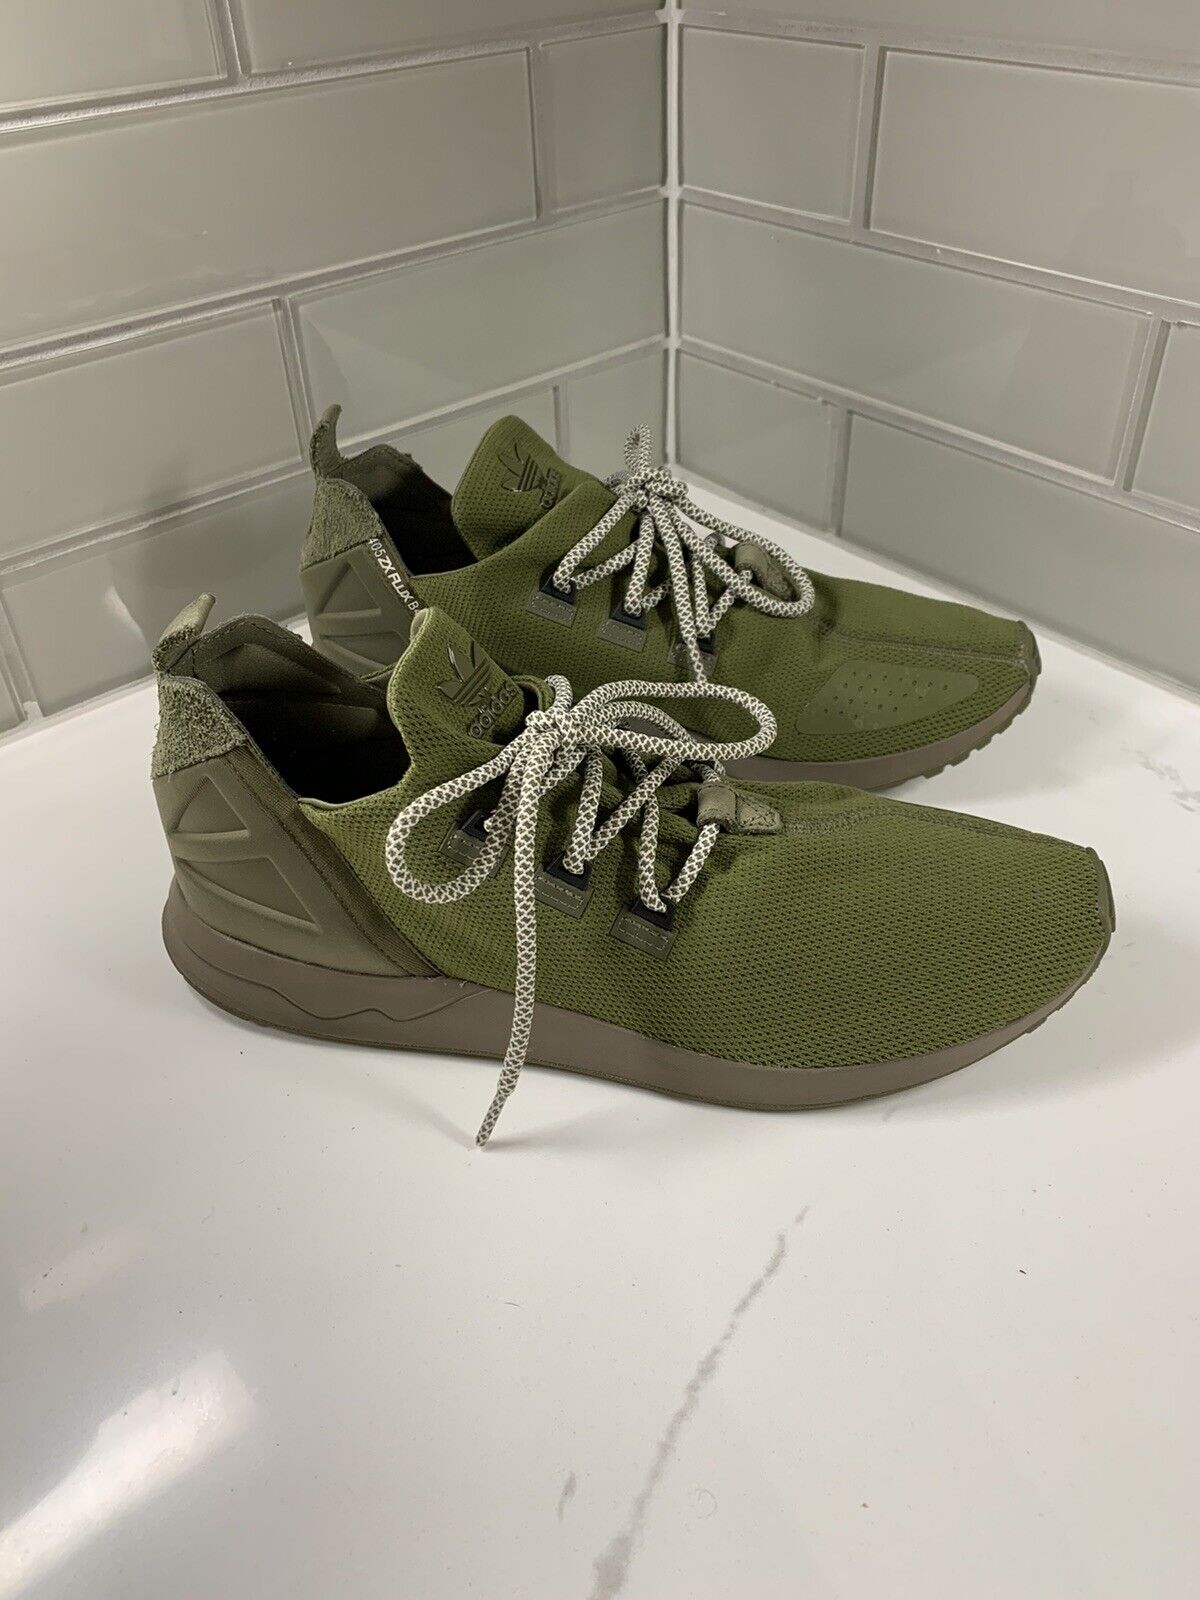 Snoep evenaar patroon RARE Adidas ZX Flux ADV X Mens 11 Shoes Sneakers Casual Trainers Olive  Green | eBay